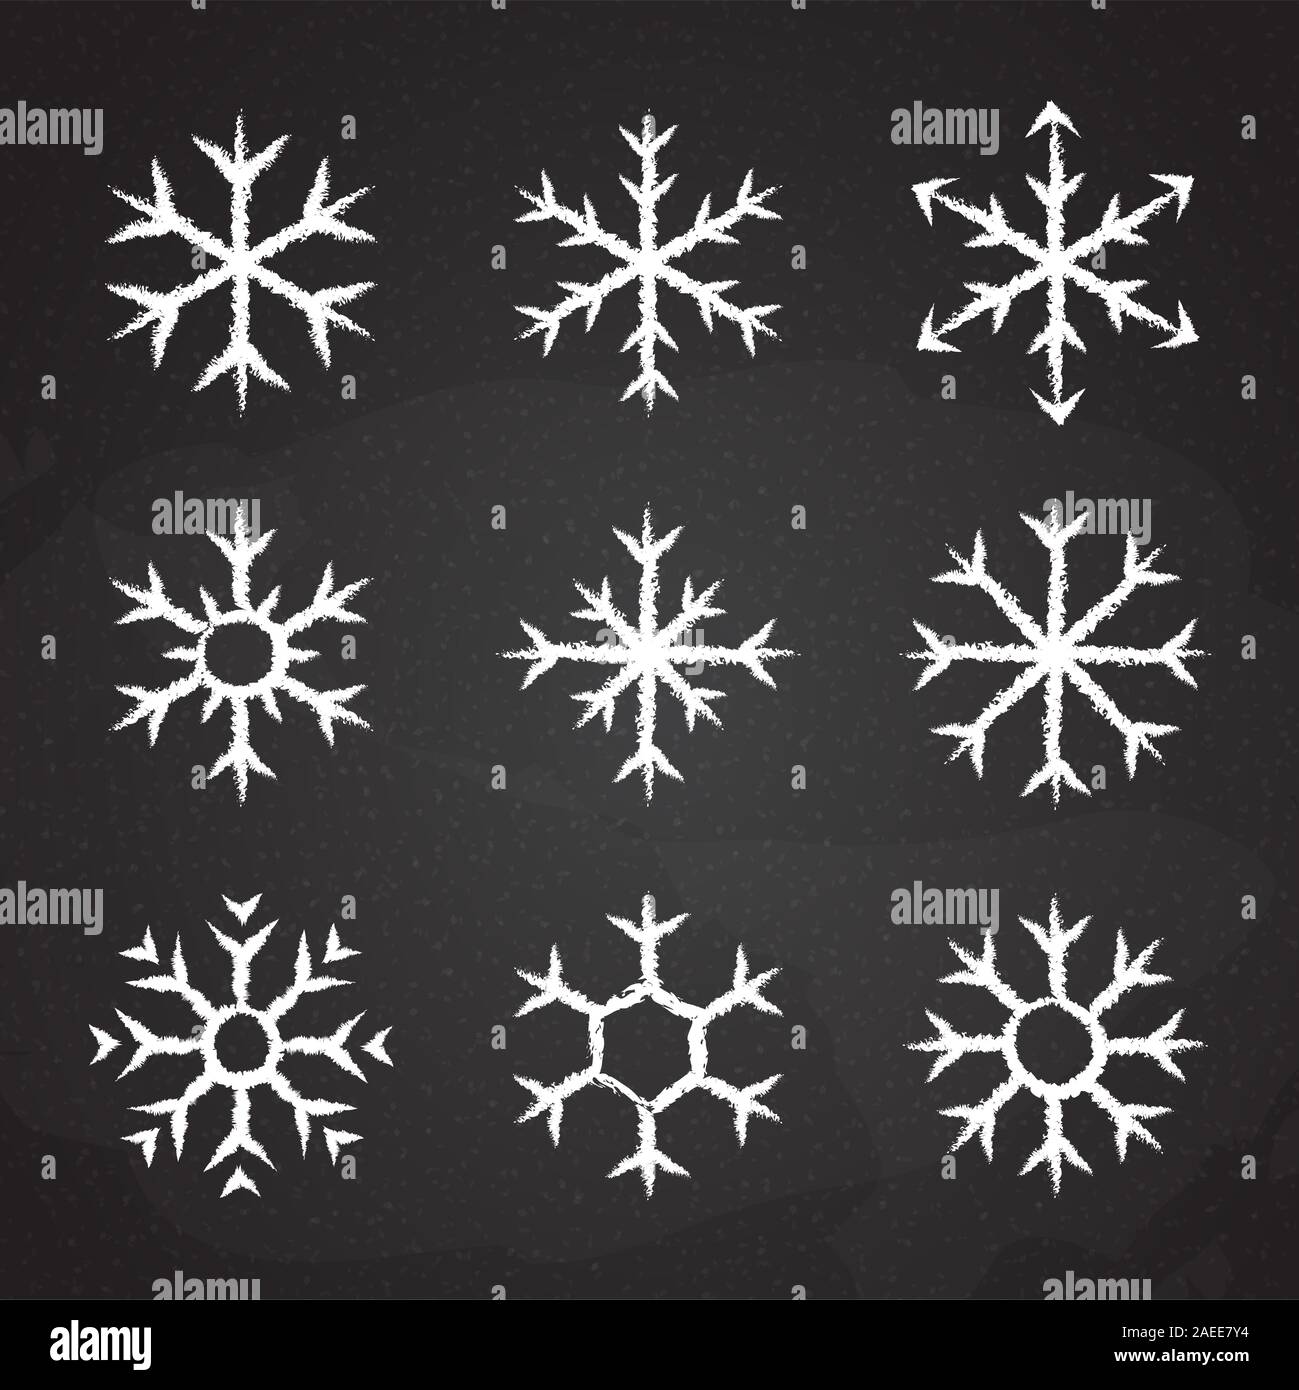 Frozen snowflake symbol collection illustration. Chalk style line white  snowflakes isolated on blackboard for abstract christmas celebration design  or winter season decoration ornament Stock Photo - Alamy